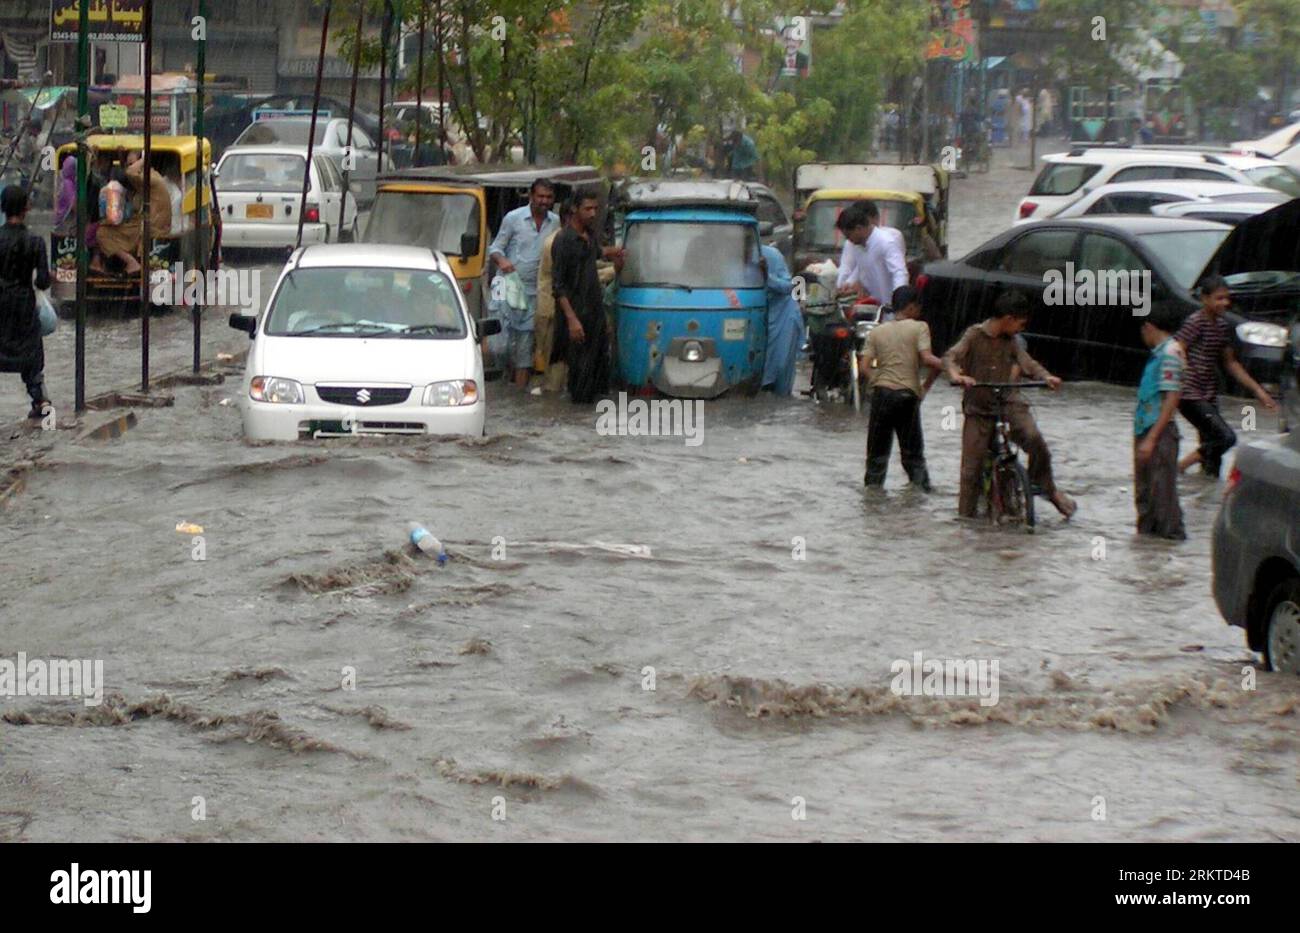 Bildnummer: 58449258  Datum: 09.09.2012  Copyright: imago/Xinhua (120909) -- HYDERABAD, Sept. 9, 2012 (Xinhua) -- Vehicles move through a flooded street in southern Pakistan s Hyderabad on Sept. 9, 2012. At least 17 were killed and over 20 others injured in several rain-related accidents in eastern and southern Pakistan on Sunday, local media and officials said. (Xinhua/Janali) (msq) PAKISTAN-HYDERABAD-FLOOD PUBLICATIONxNOTxINxCHN Gesellschaft Wetter Regen Überschwemmung xjh x0x premiumd 2012 quer      58449258 Date 09 09 2012 Copyright Imago XINHUA  Hyderabad Sept 9 2012 XINHUA VEHICLES Move Stock Photo